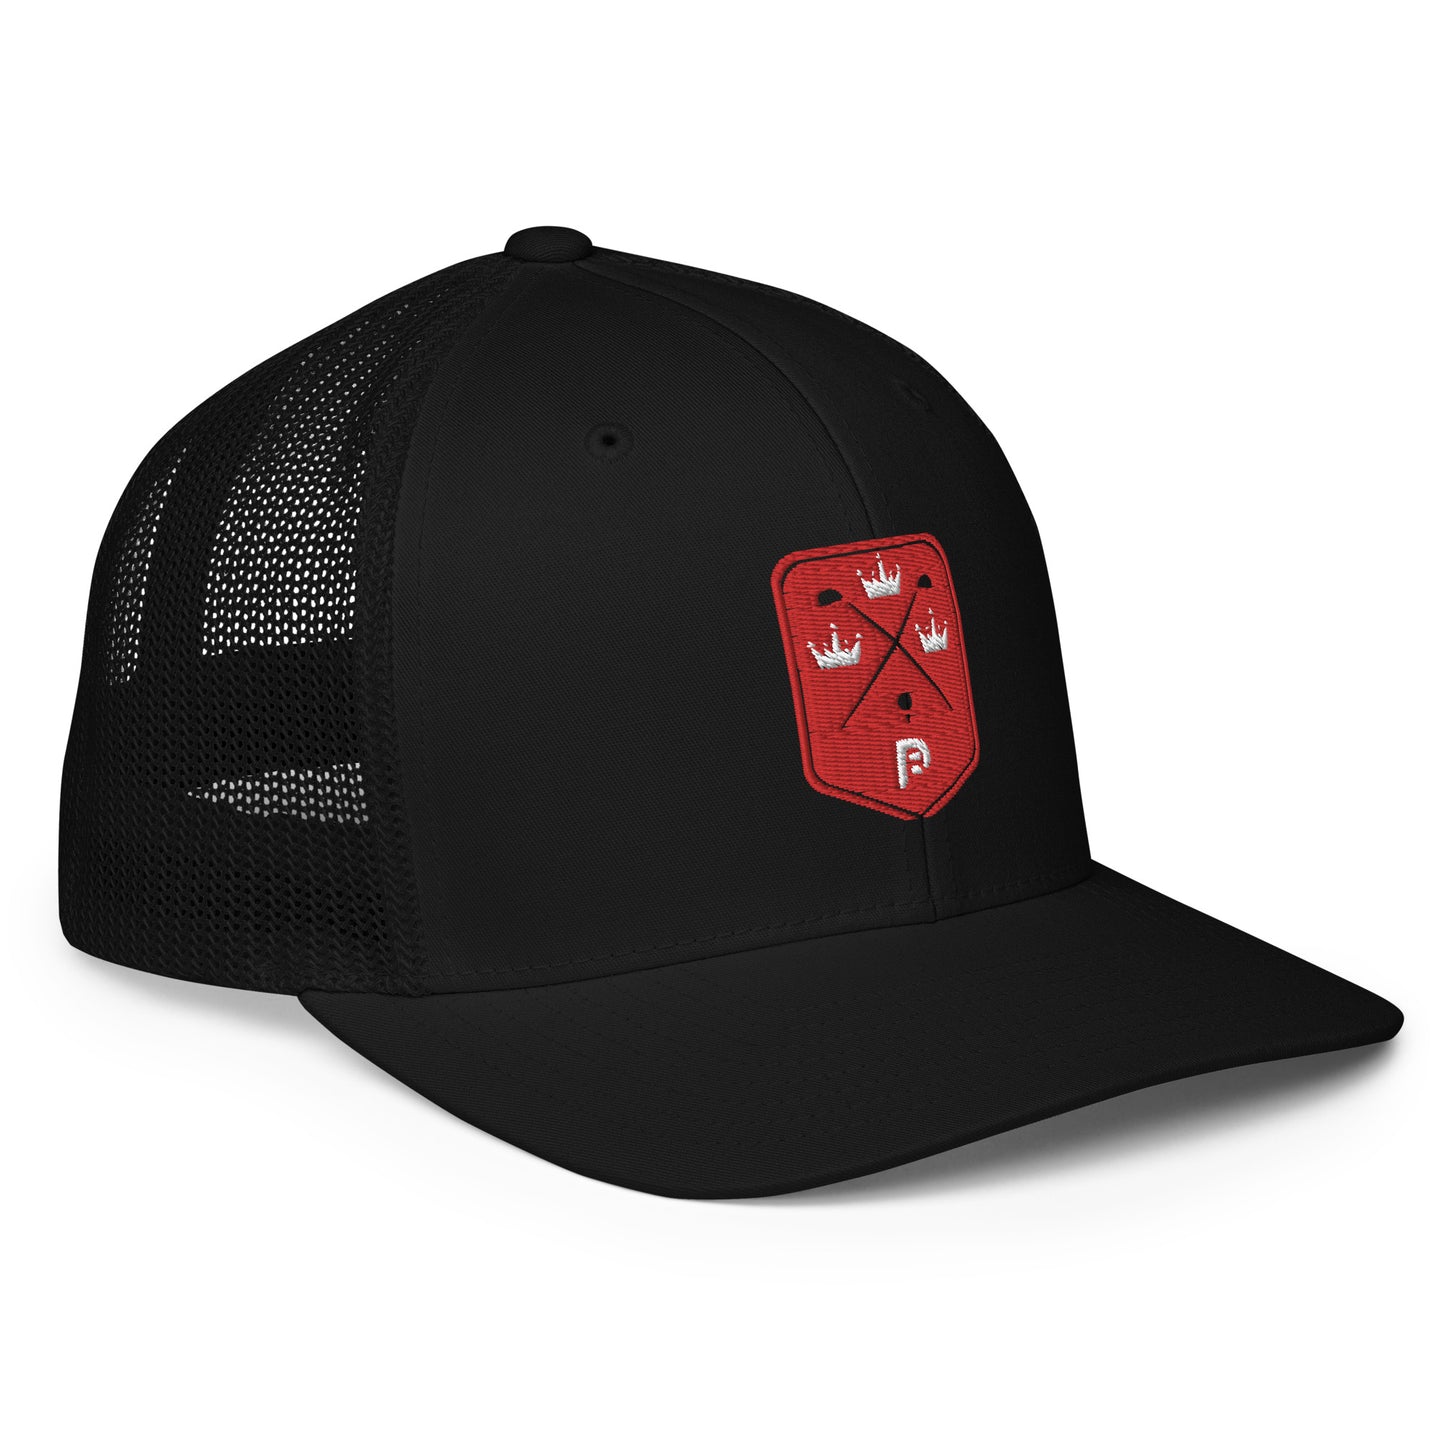 Red Weapon King Golf Closed-back Trucker Cap